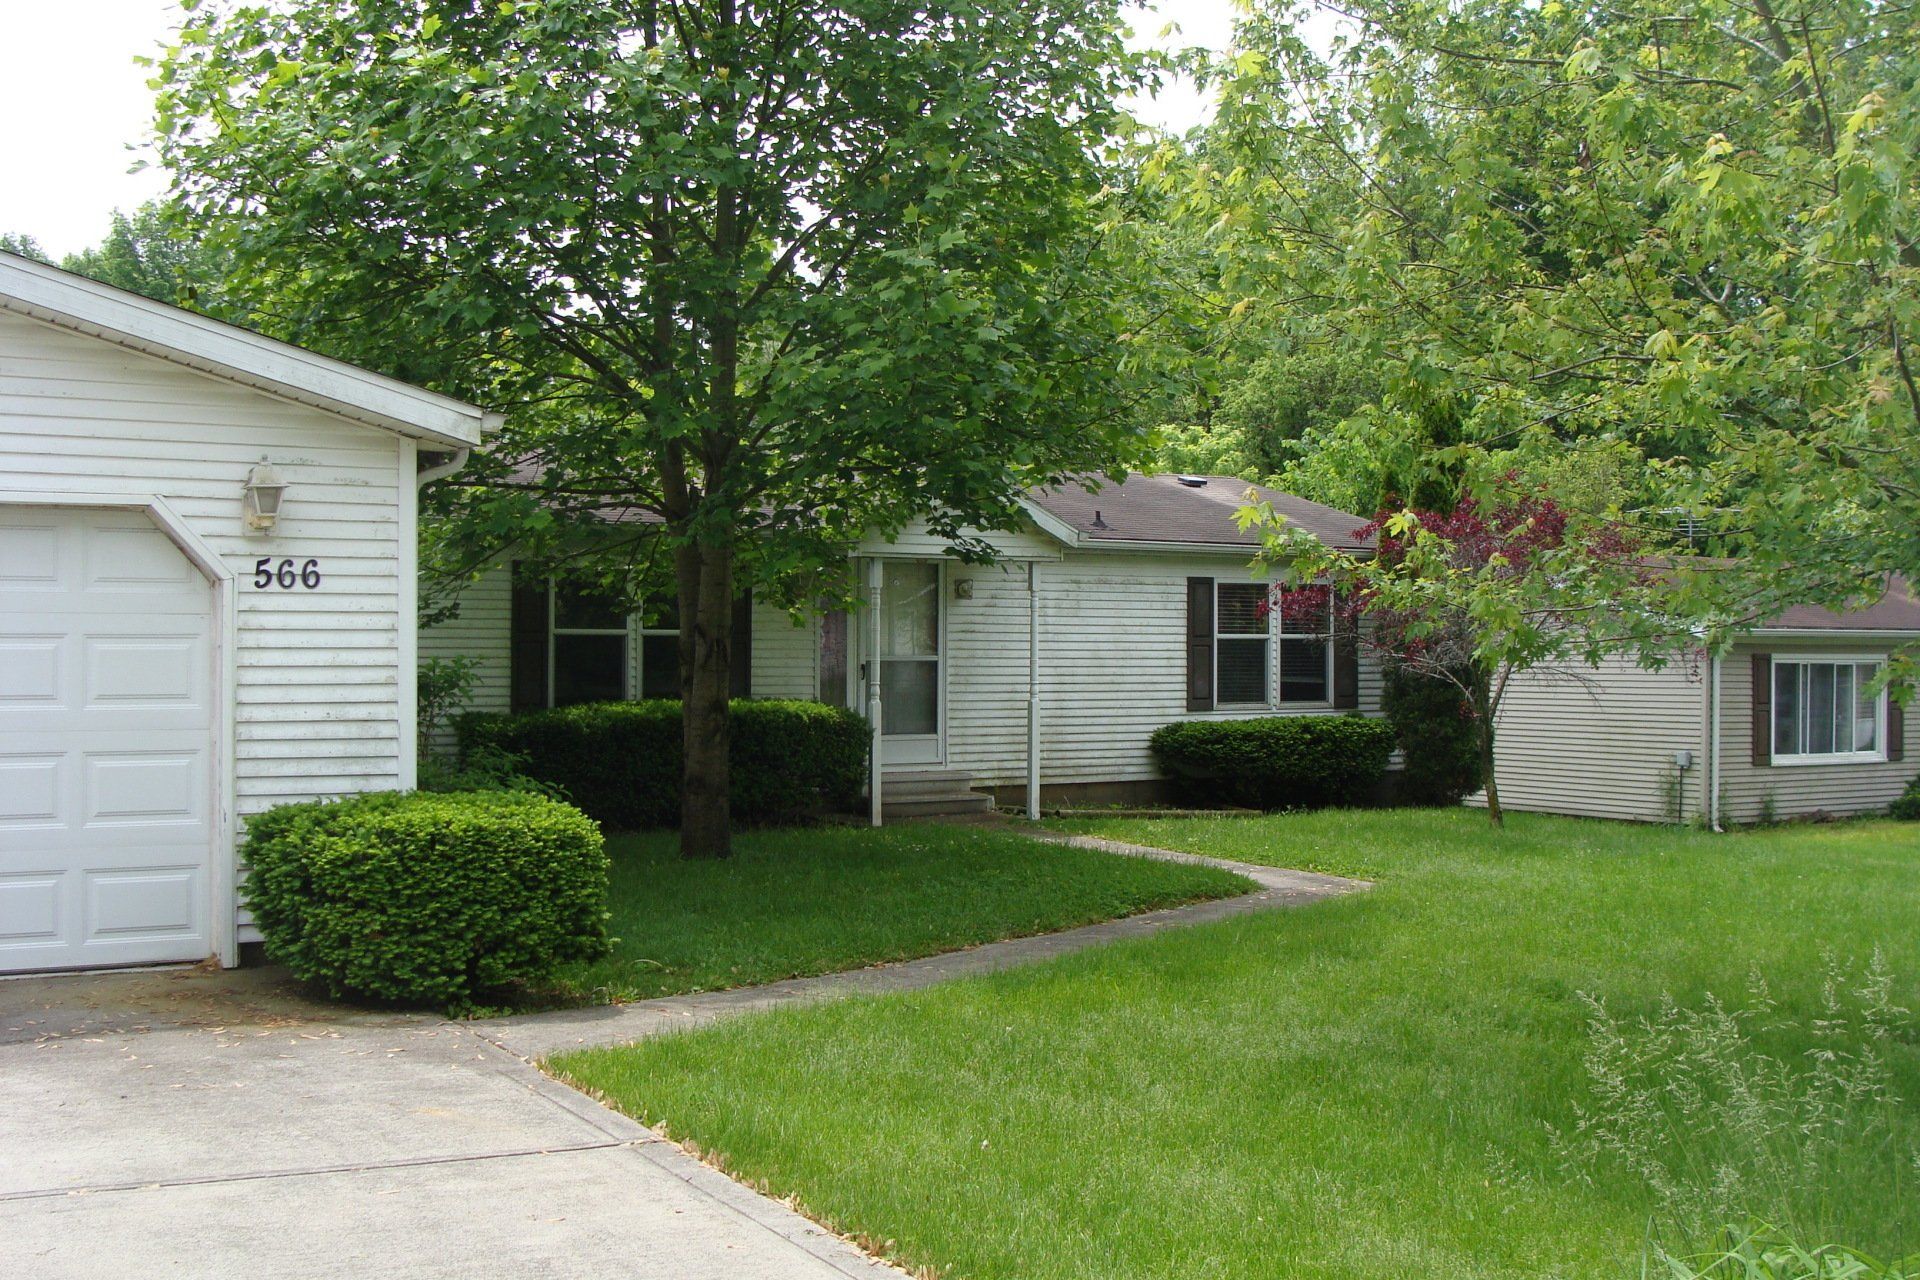 590 Love Place Cloverdale, Indiana, USA Type: House Area: 1188 ft² 3 Bed/2 Bath